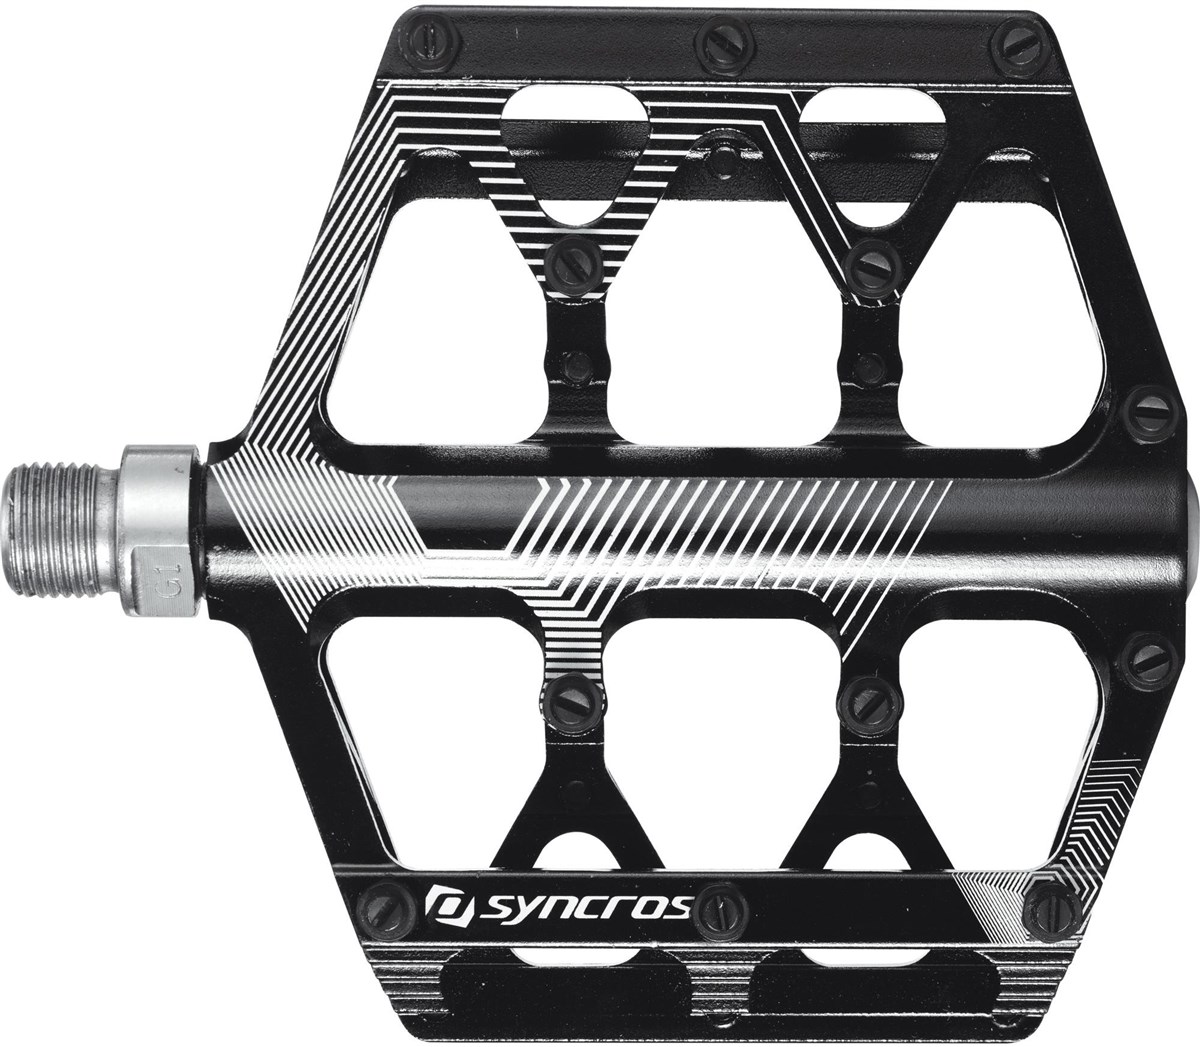 Syncros FR Flat Pedals product image